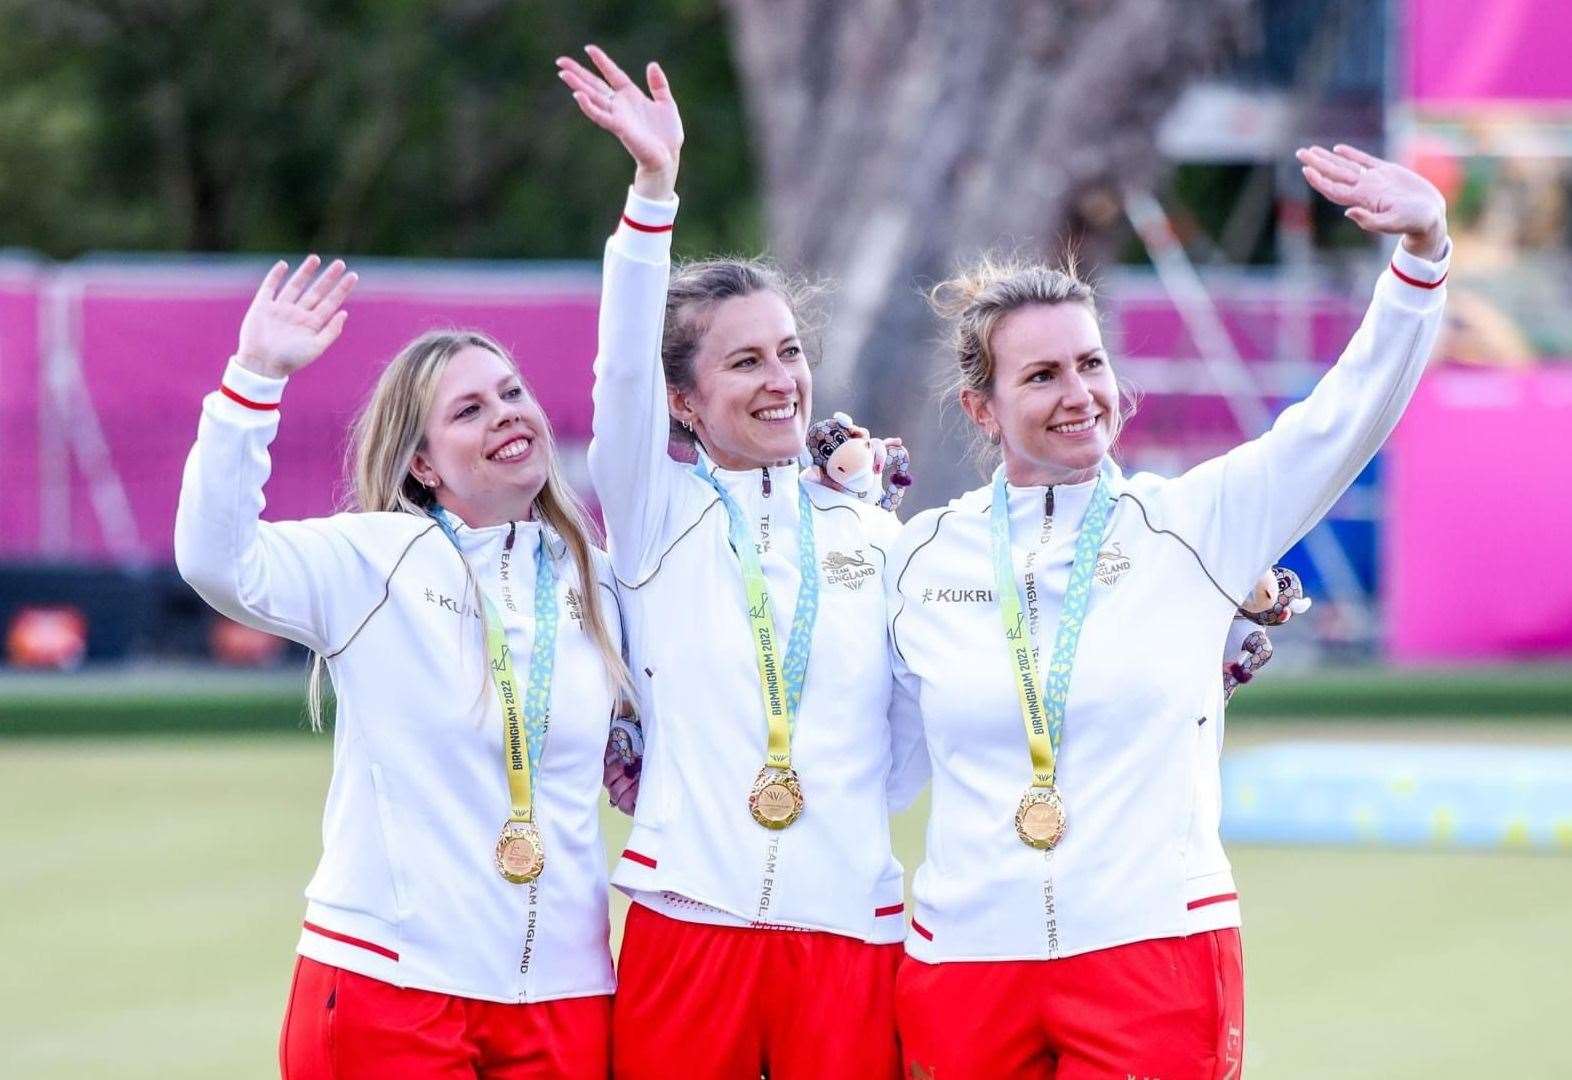 Sian Honnor alongside Natalie Chestney and Jamie-Lea Winch, donning their gold medal